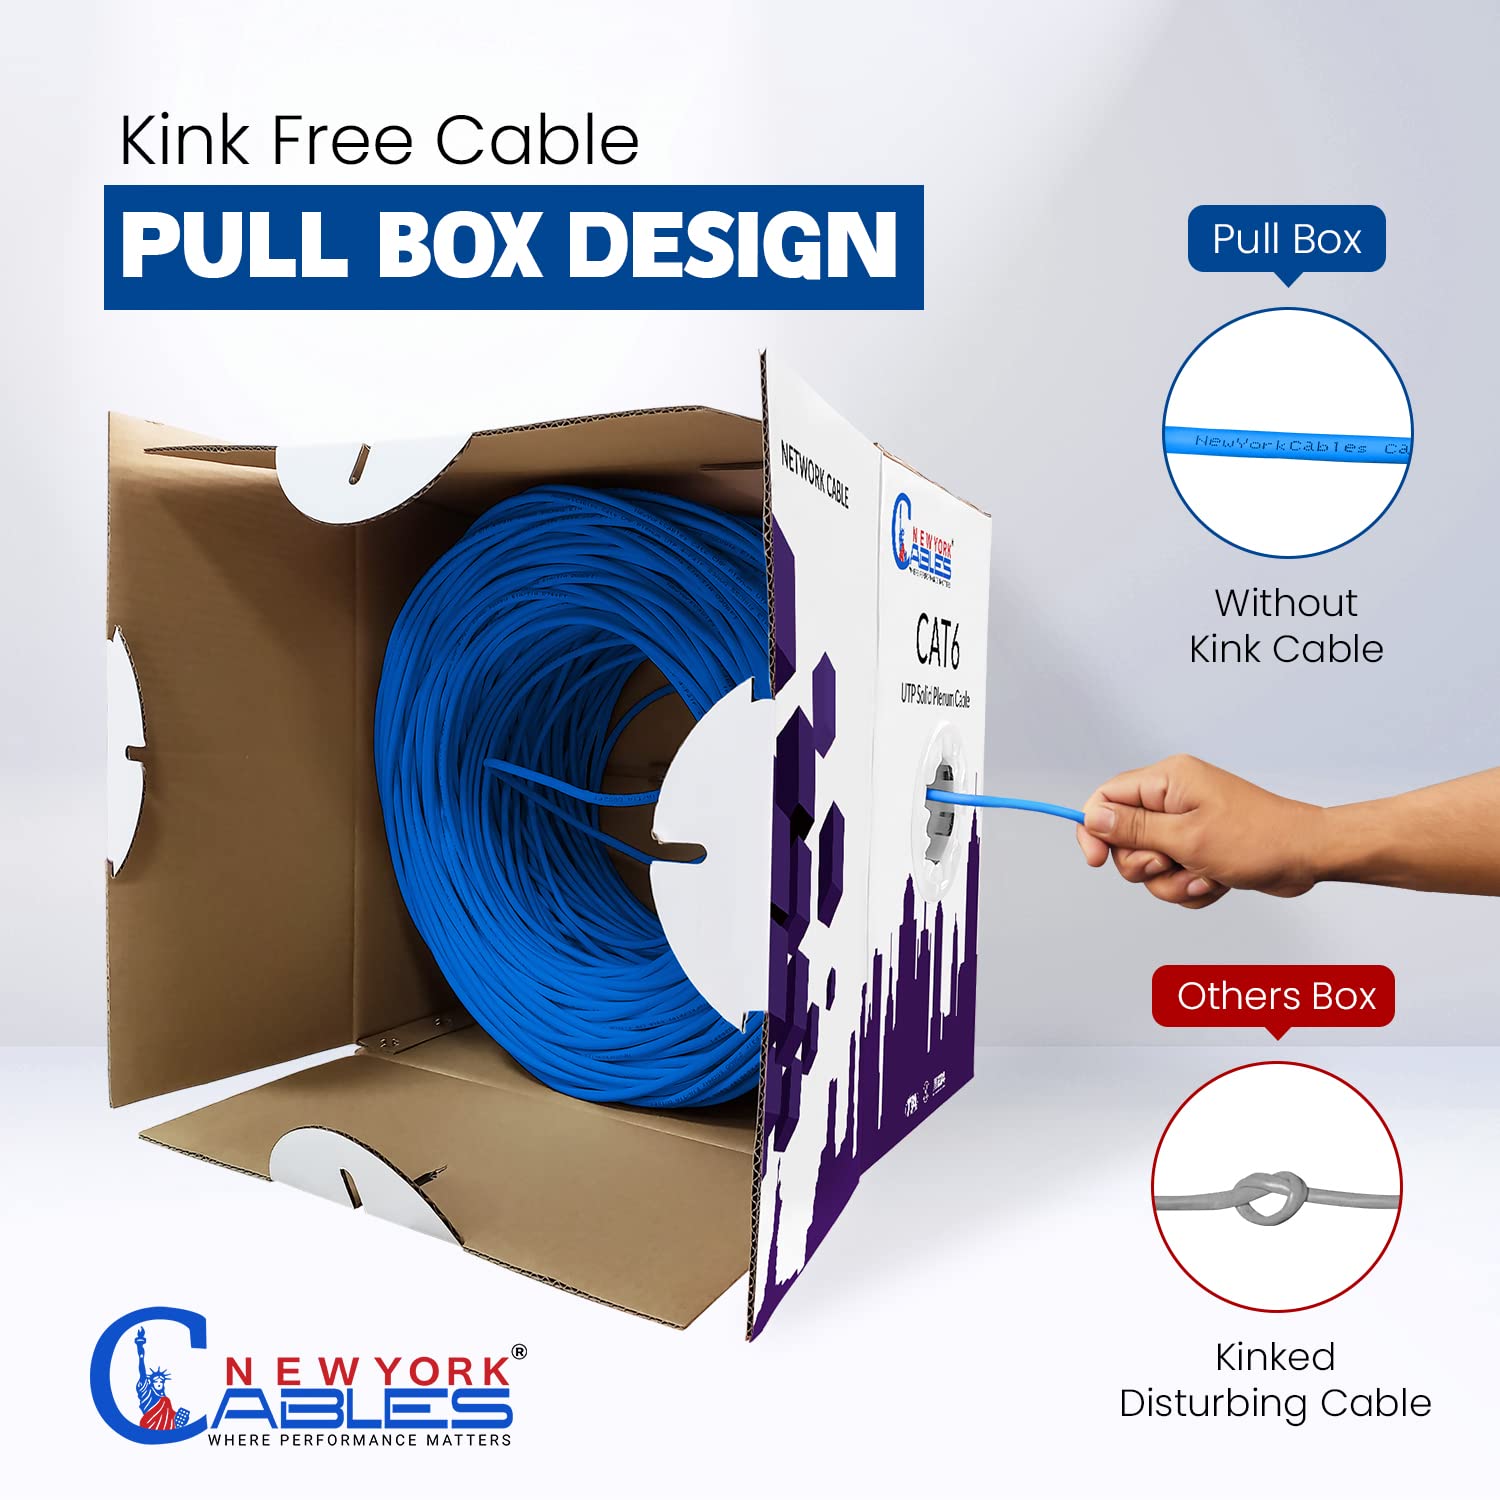 NewYork Cables CAT6 Plenum Cable 1000ft (CMP) | Easy to Pull Quality Tested Plenum Rated Wire | 23AWG Solid Conductor 550MHz, 4Pair 10 GB UTP Internet Cable, Available in Multi Colors (Blue)